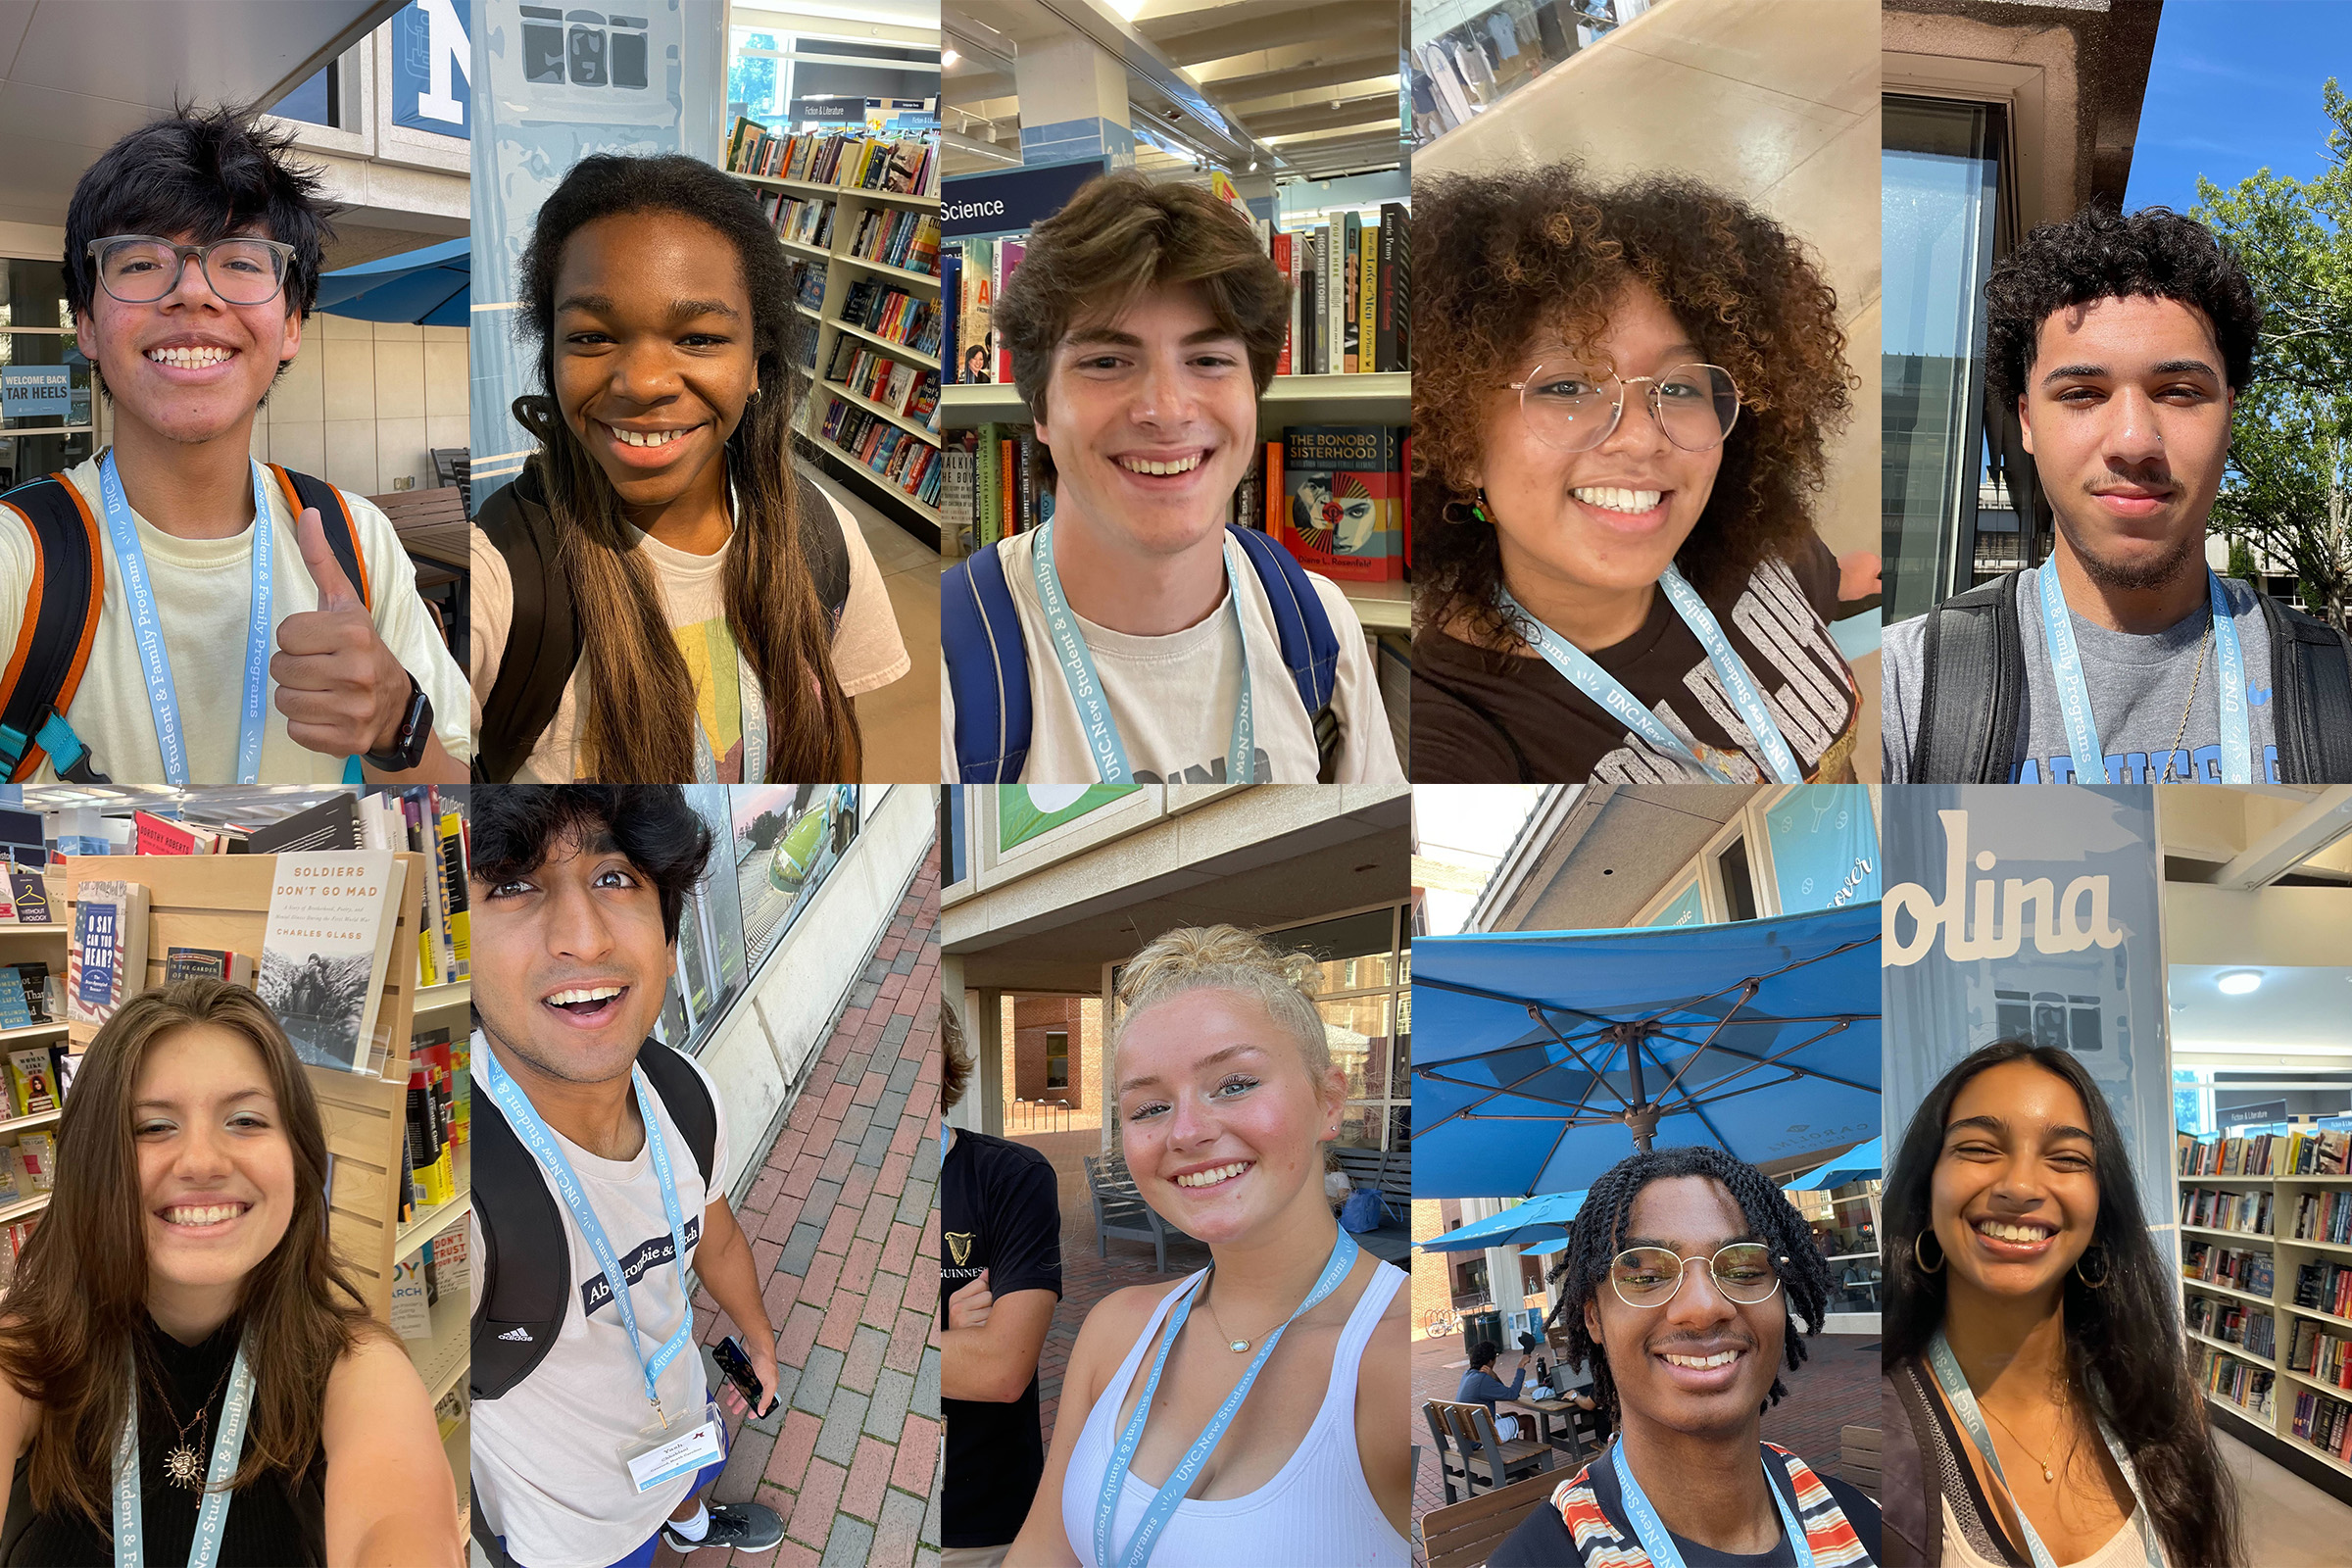 A collage of selfie photos taken by 10 incoming first-year students at UNC-Chapel Hill